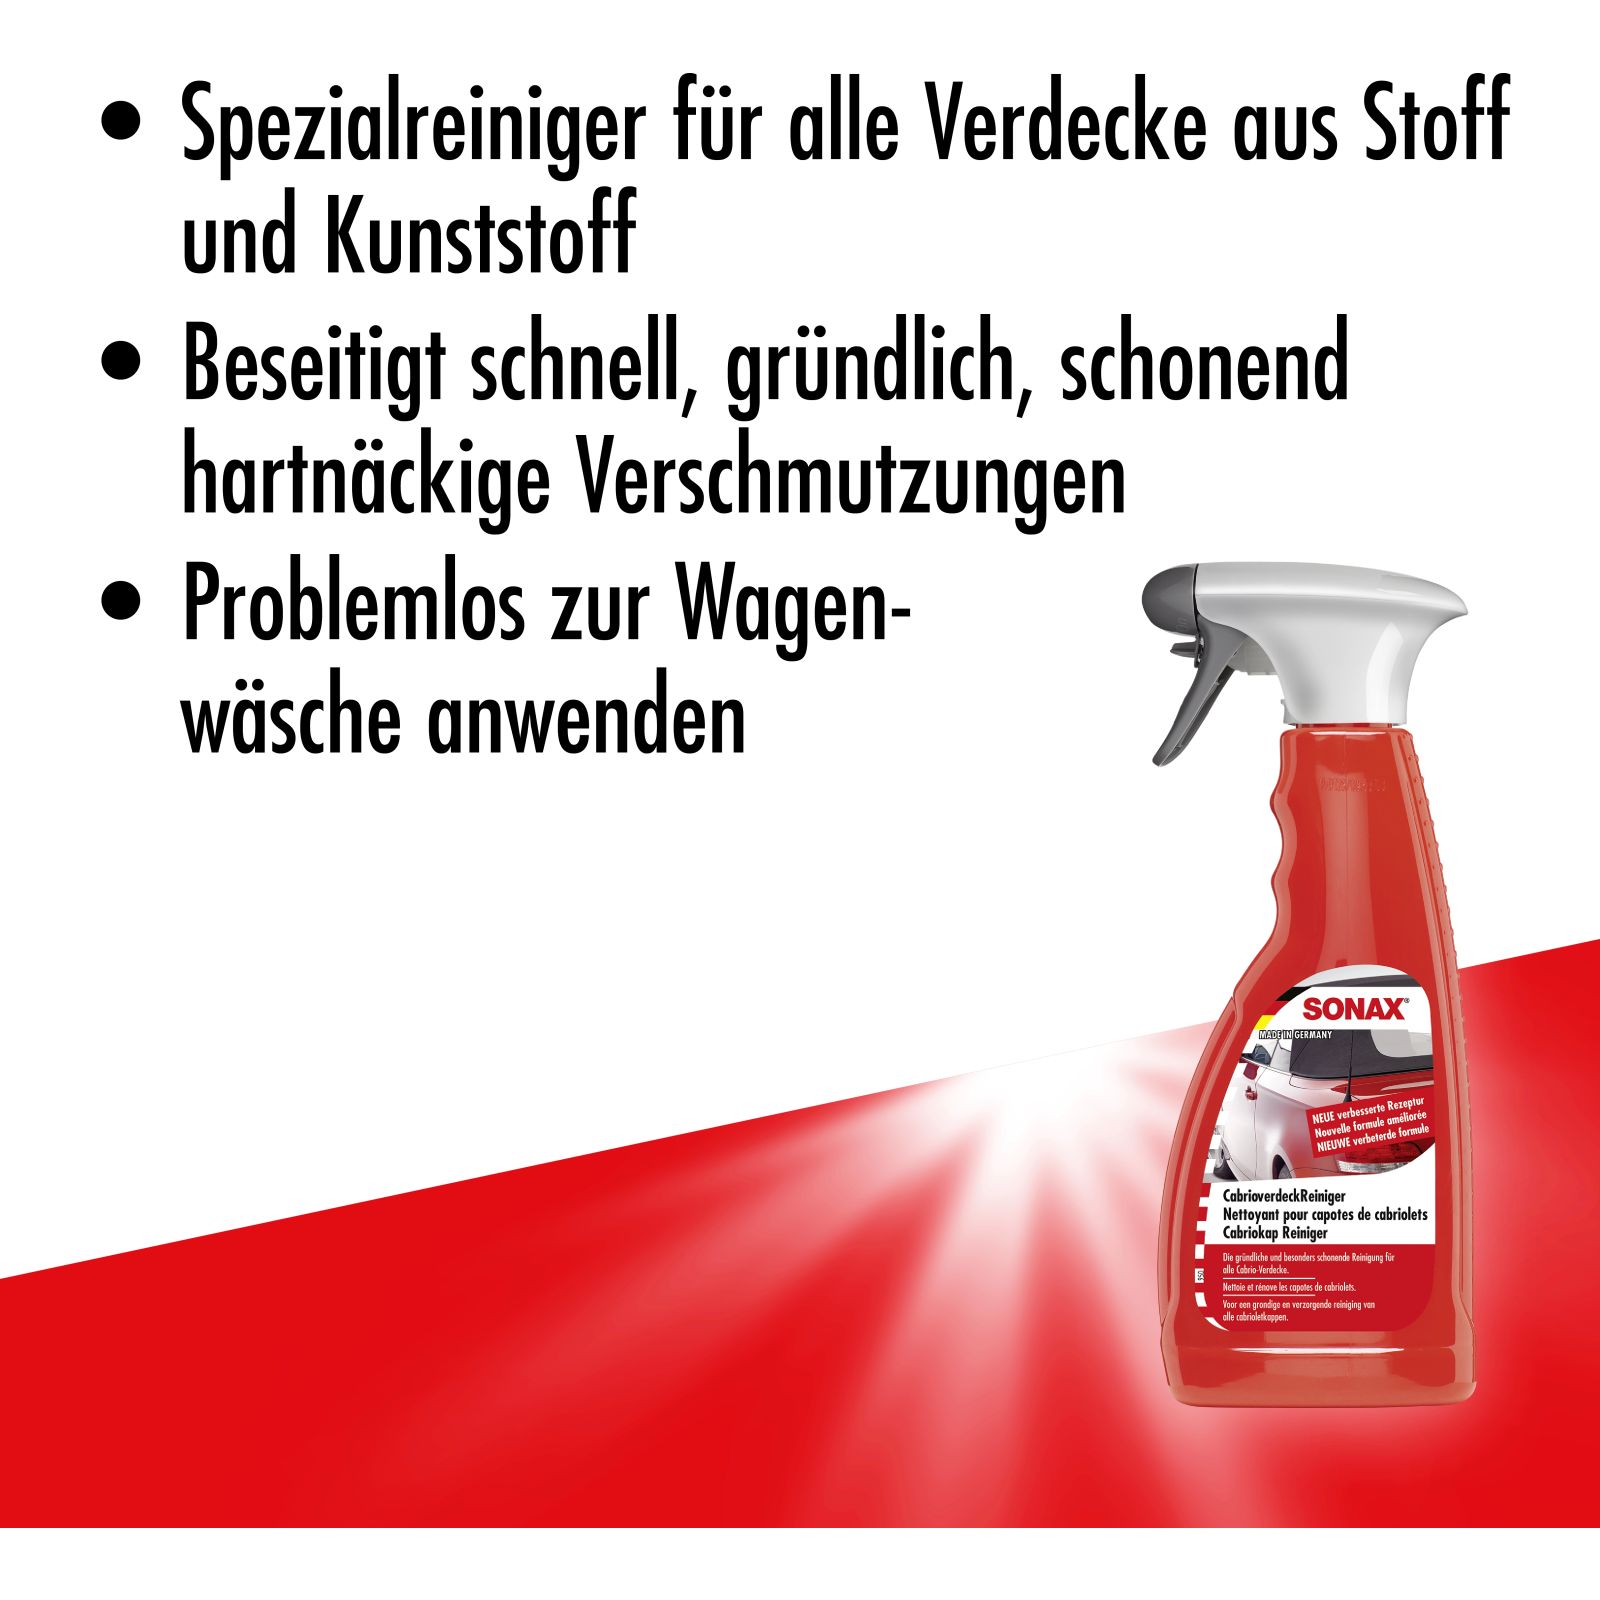 https://www.autoteile-store.at/img/product/sonax-cabrioverdeckreiniger-500ml-03092000-4559/1762d9c1897e245d88ad218582065f32_1600.jpg